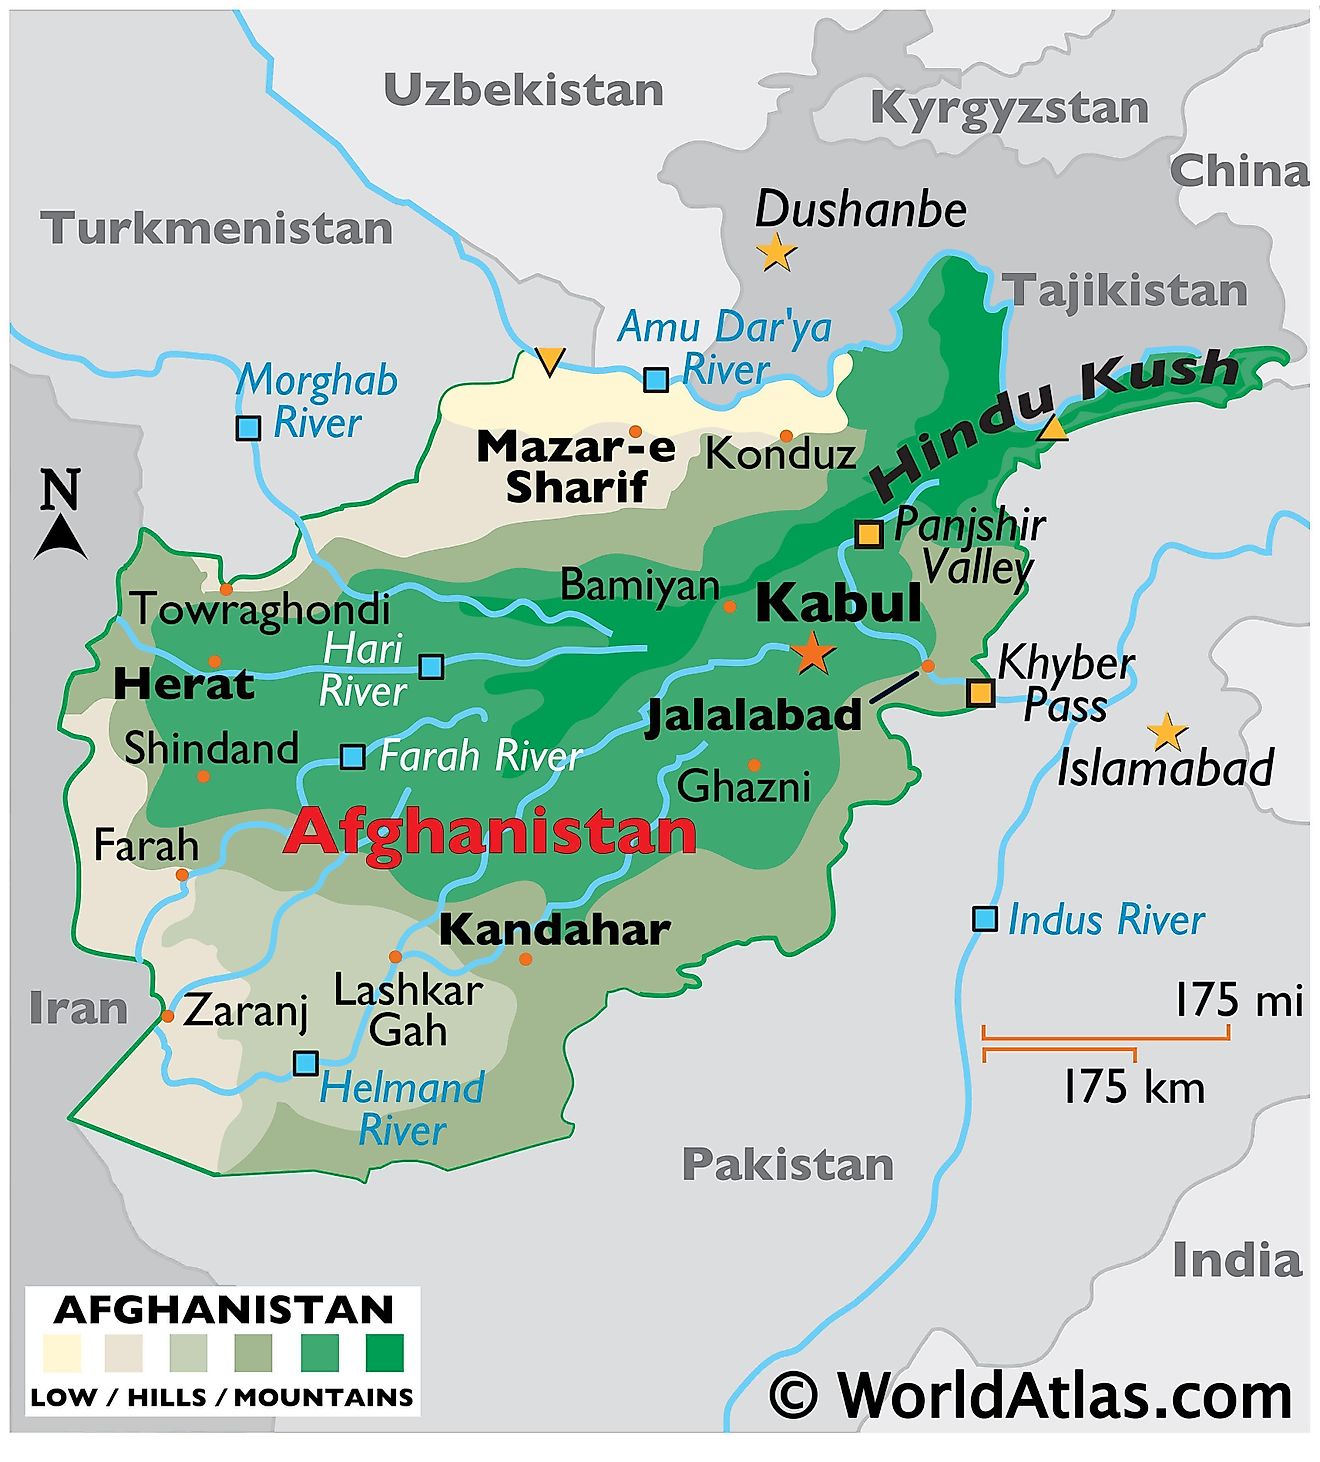 Physical Map of Afghanistan showing state boundaries, relief, major rivers, mountains, important cities, and more.